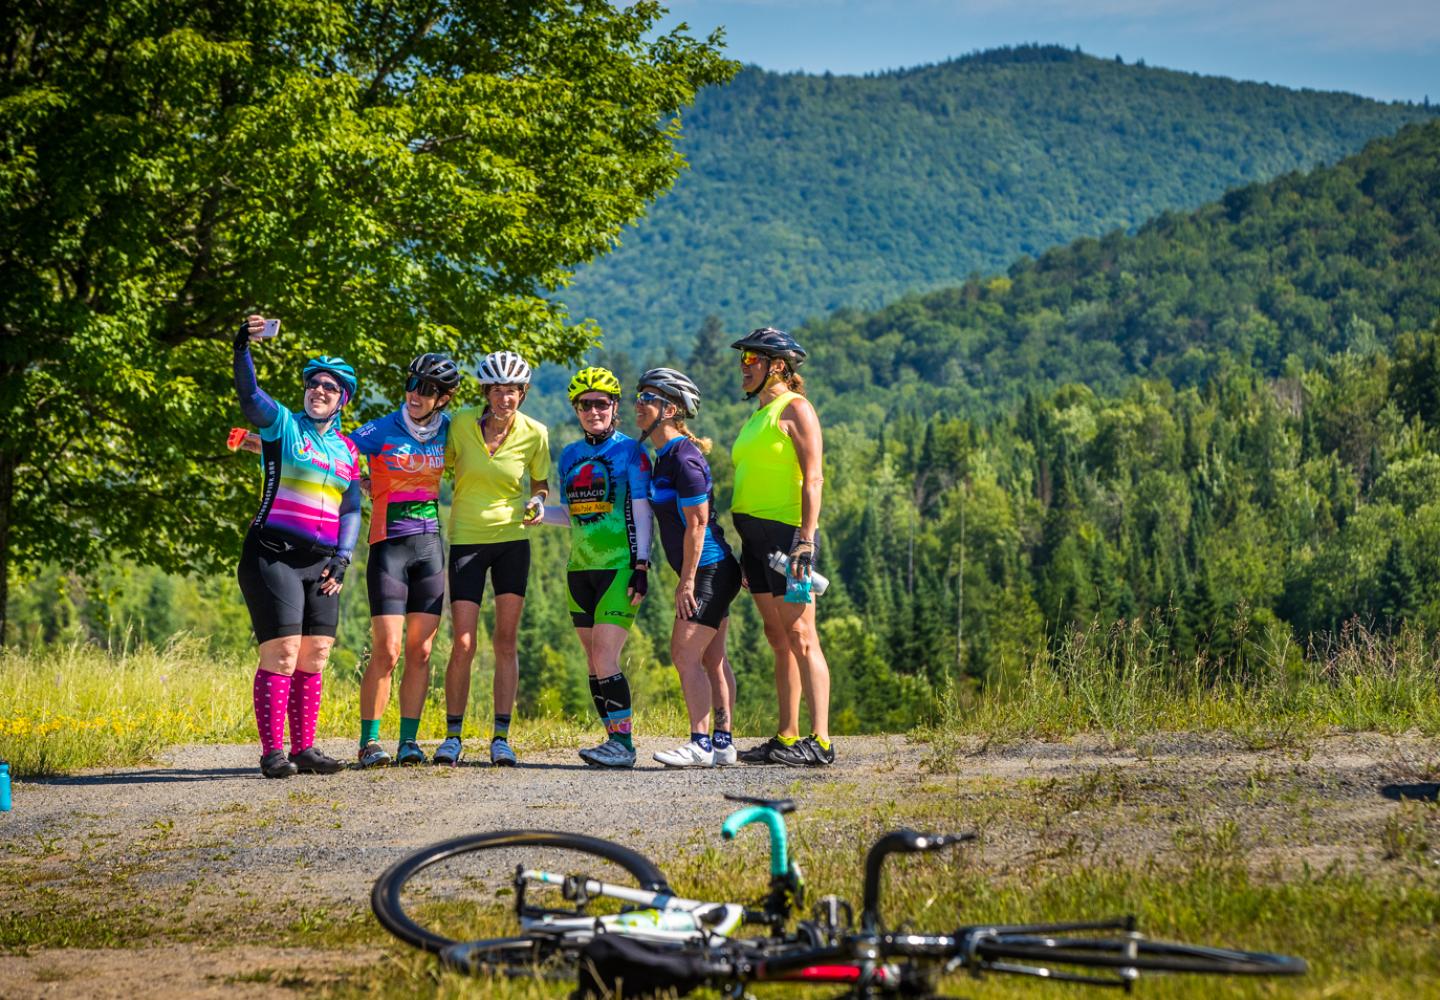 Registration for the June 23-25 Adirondack Women's Weekend is now open.